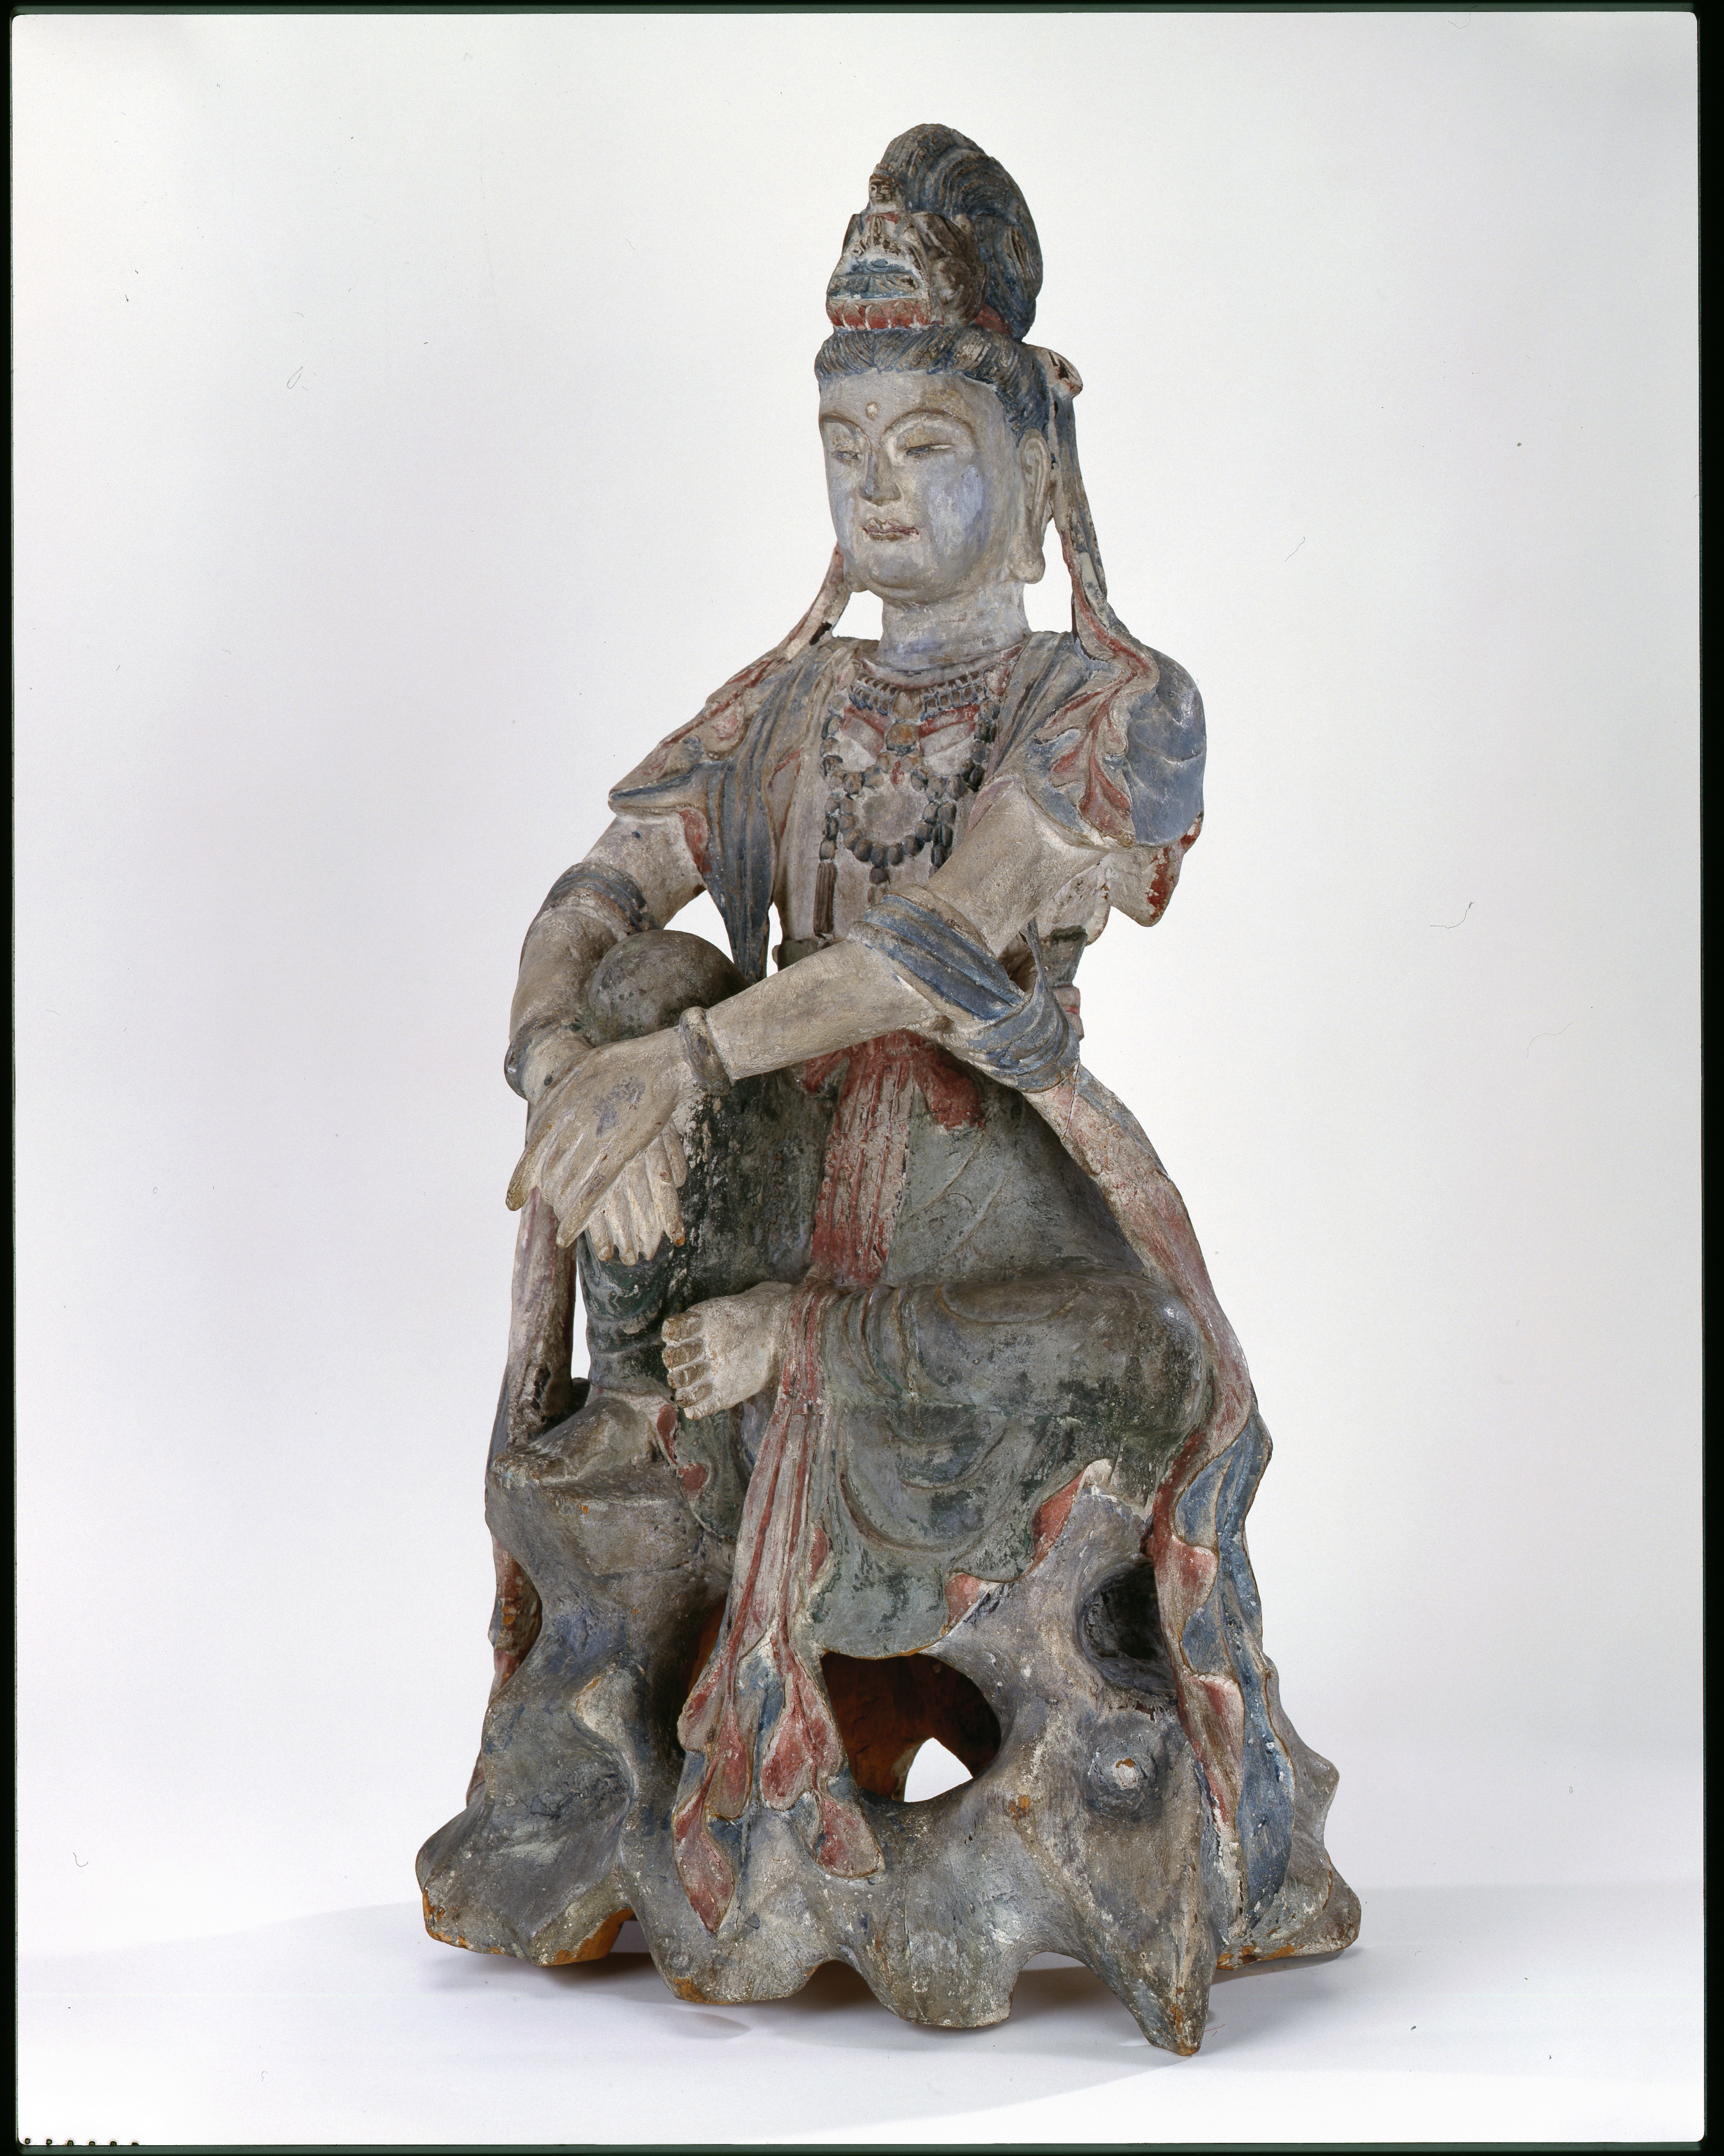 Guanyin, Buddhist deity of Grace. China, Ming period (1368-1644). From the collection of André and Taisia Zhaspar.